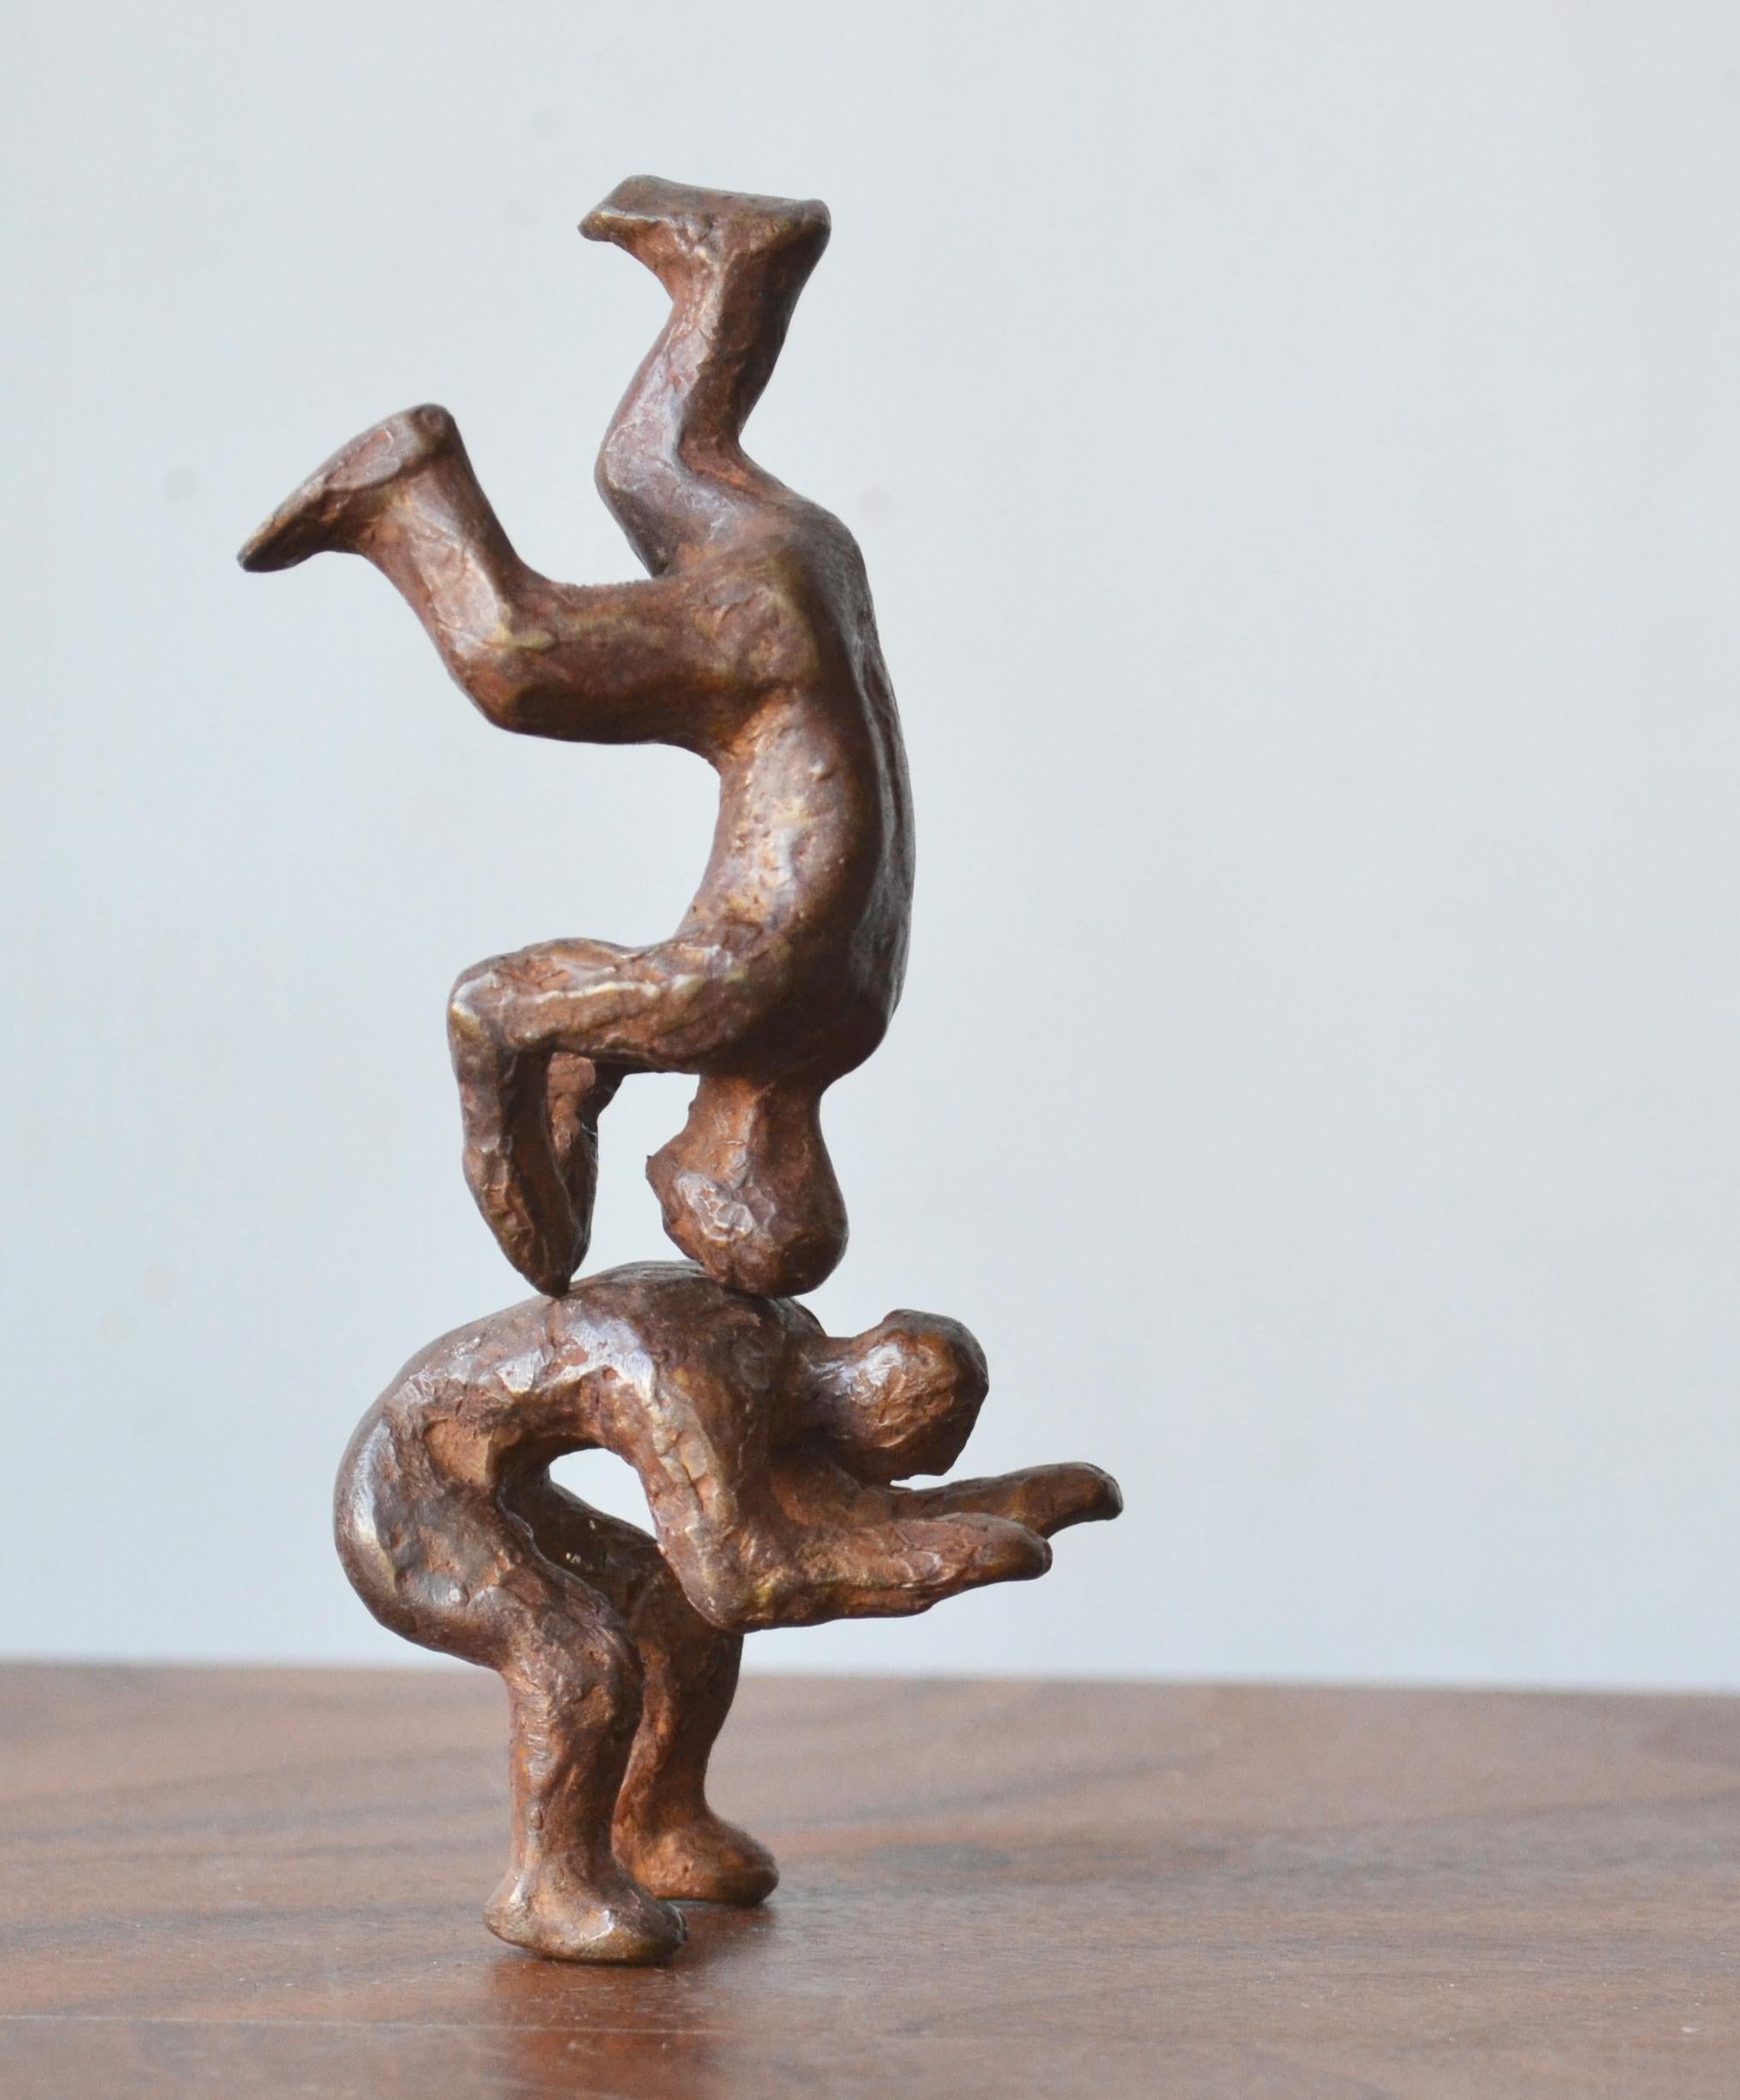 Why Fight When You Can Play? -playful interactive bronze figures sold in pairs - Sculpture by Noa Bornstein